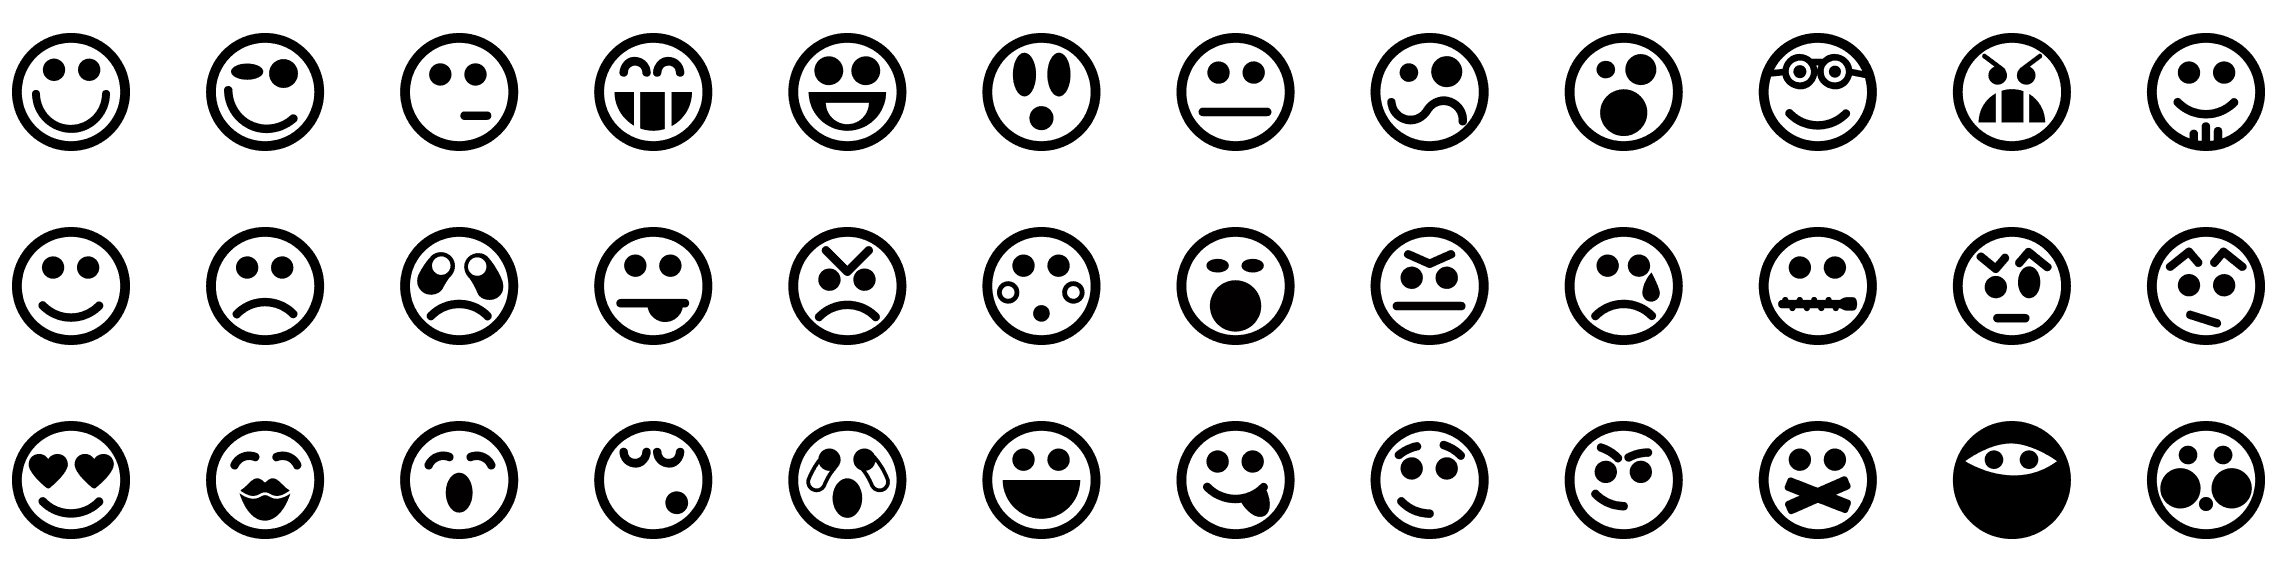 emoticons-1-glyph-icons-preview